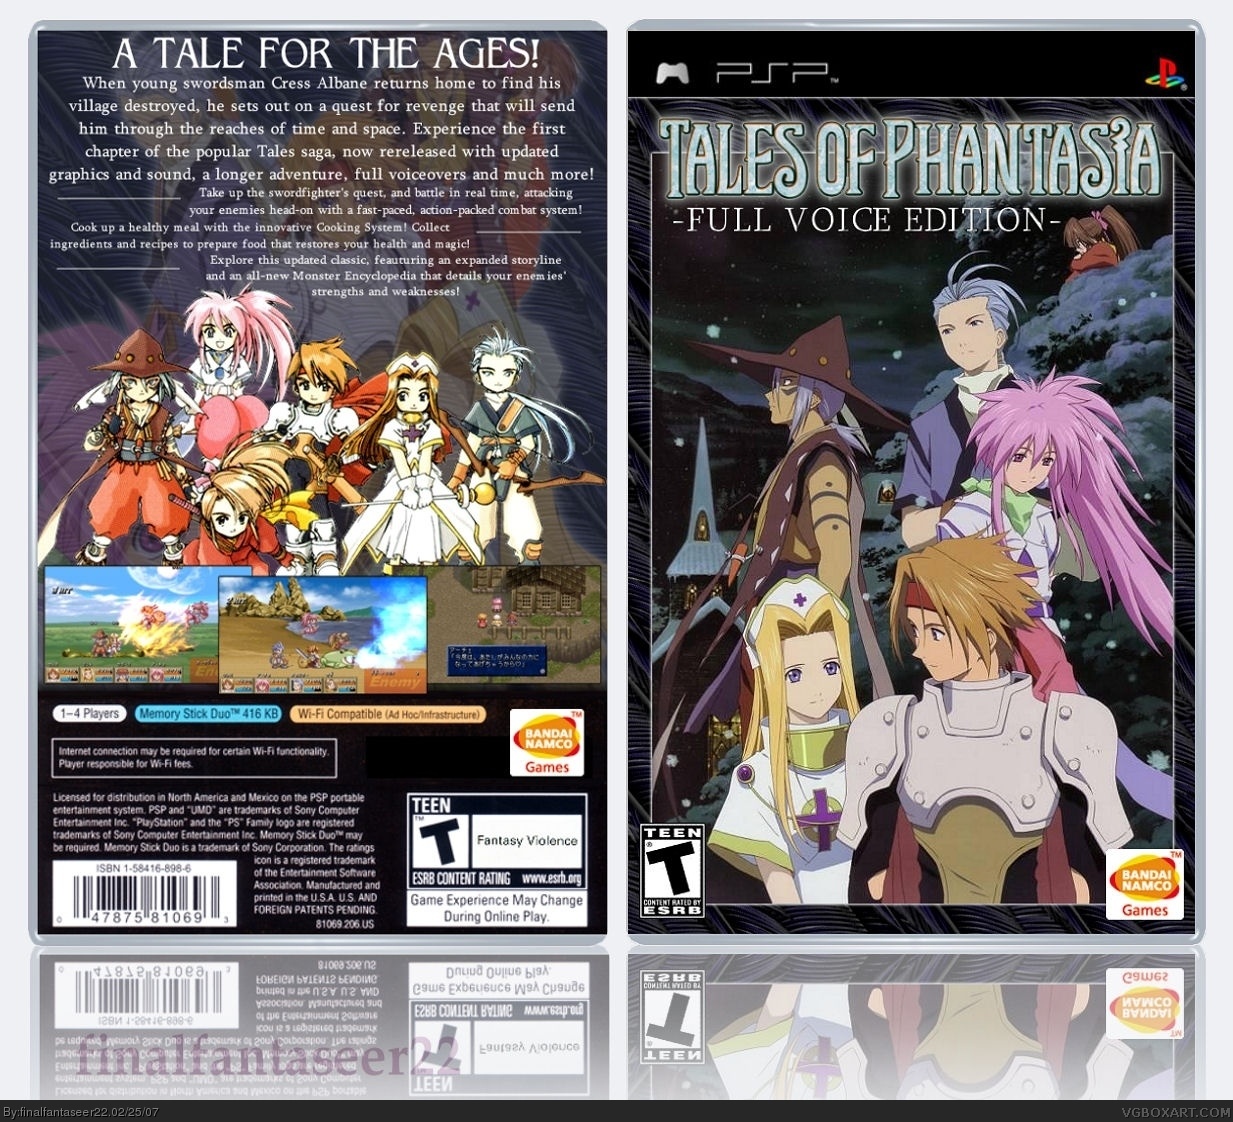 tales of phantasia full voice edition english patch